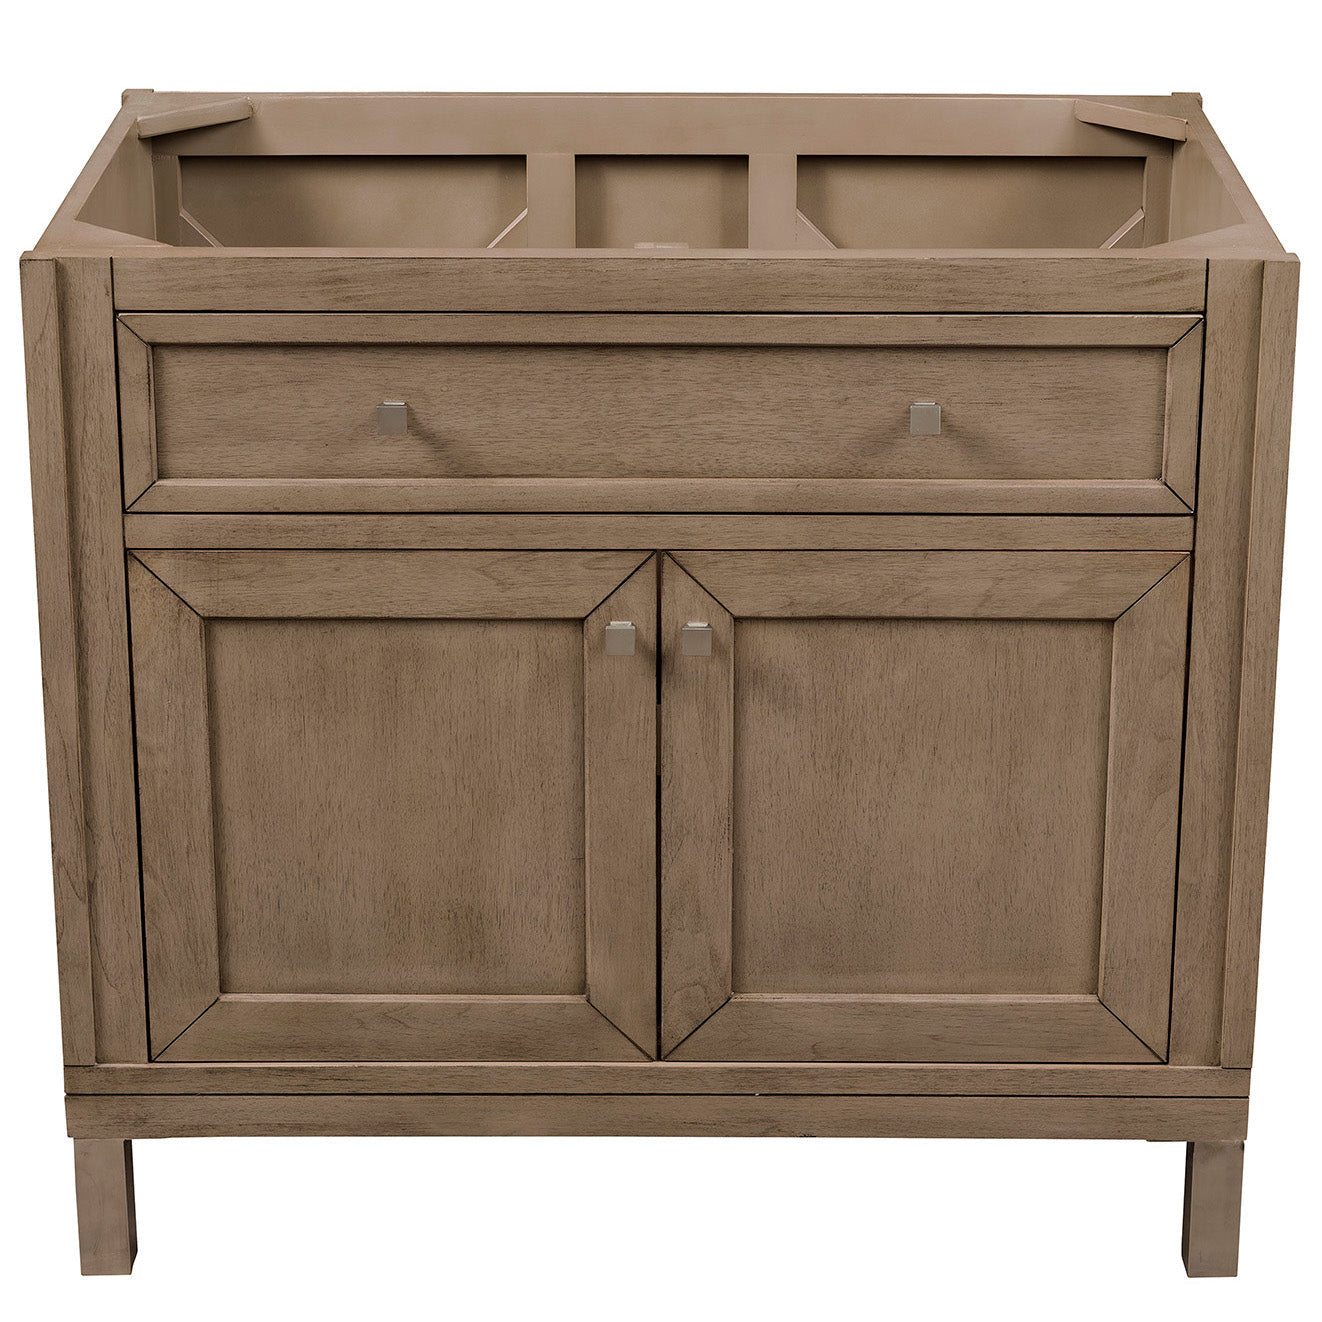 James Martin Vanities Chicago Collection 36 in. Single Vanity in Whitewashed Walnut, Cabinet Only